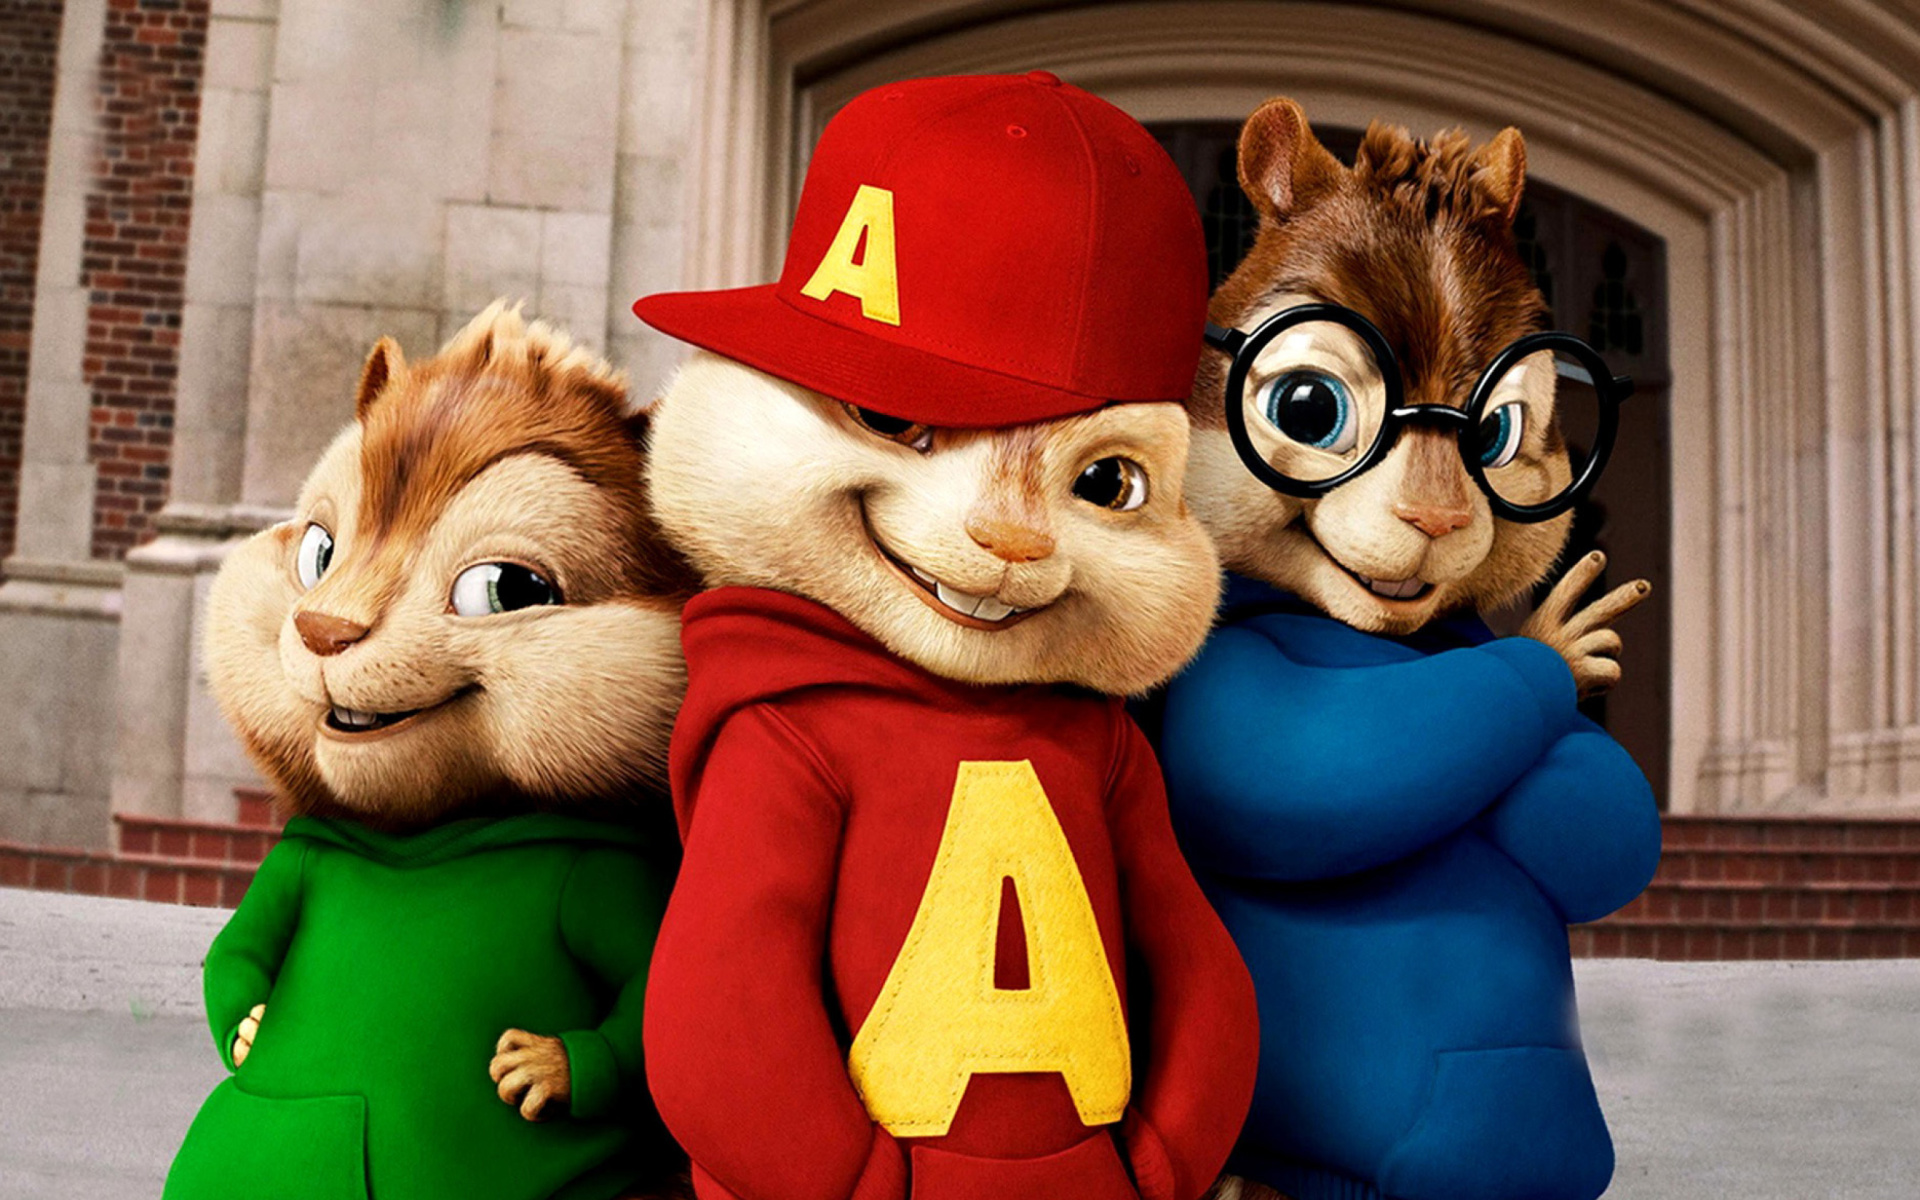 Who are the Chipmunks girlfriends?